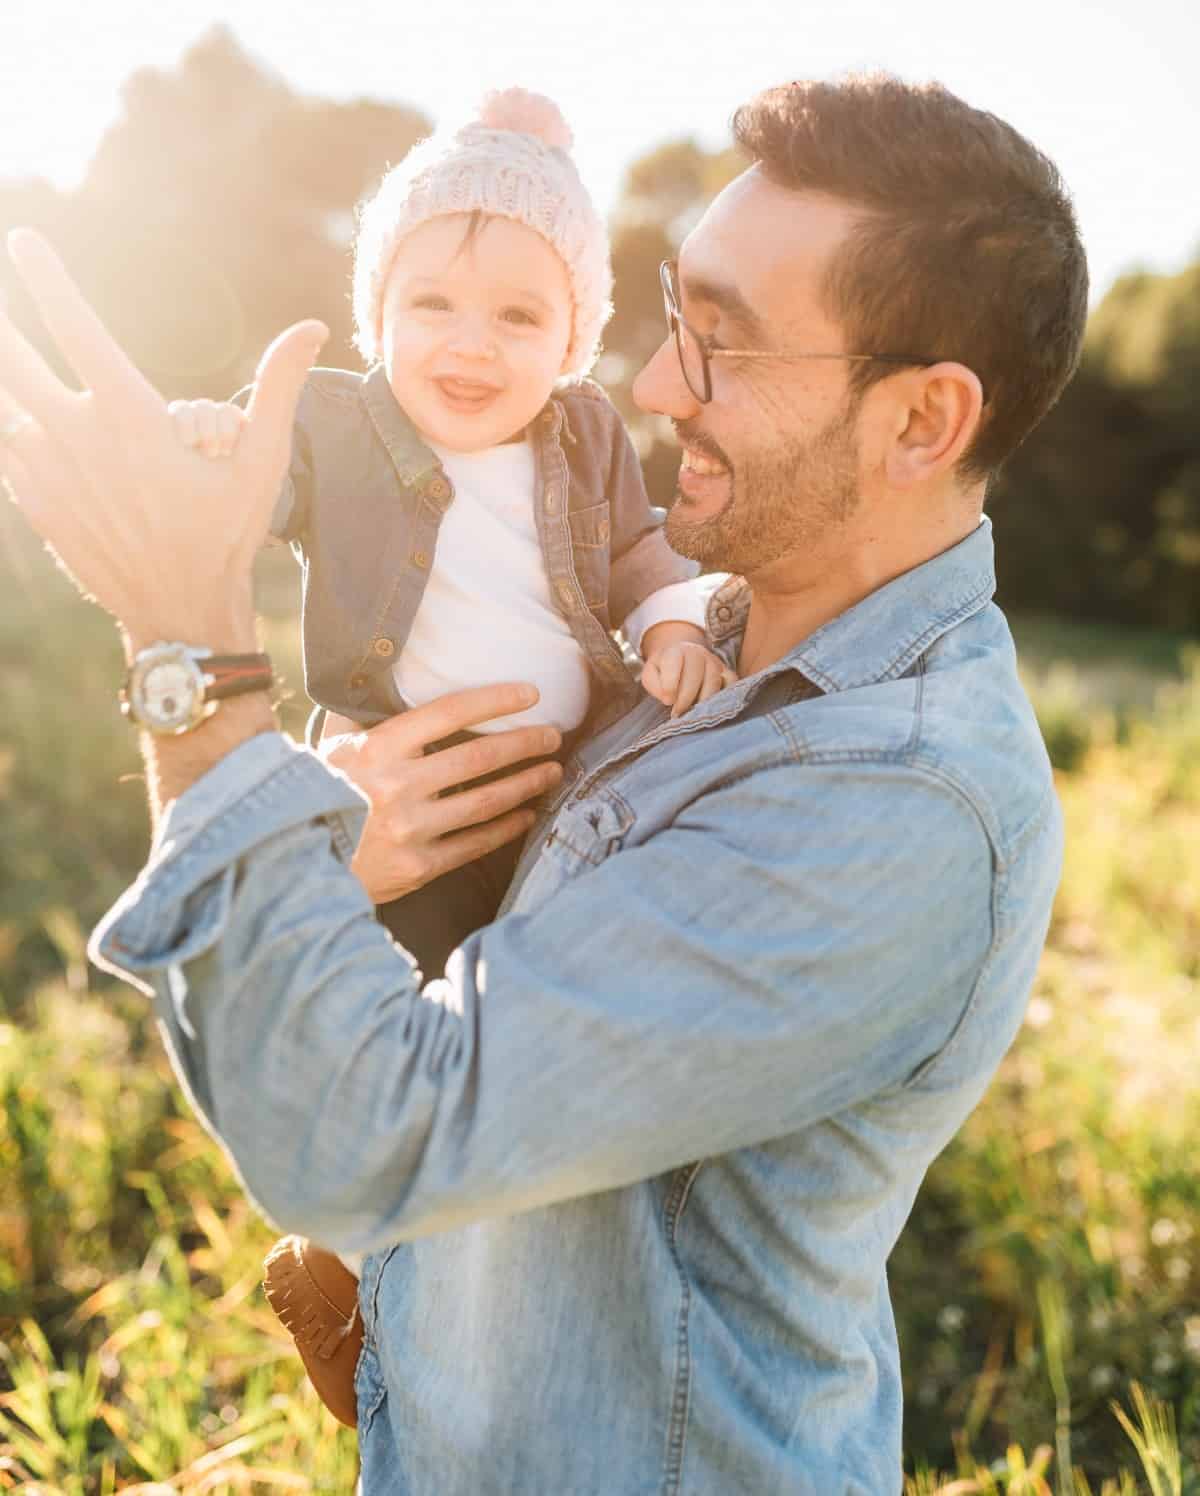 A dad holding his daughter outside.